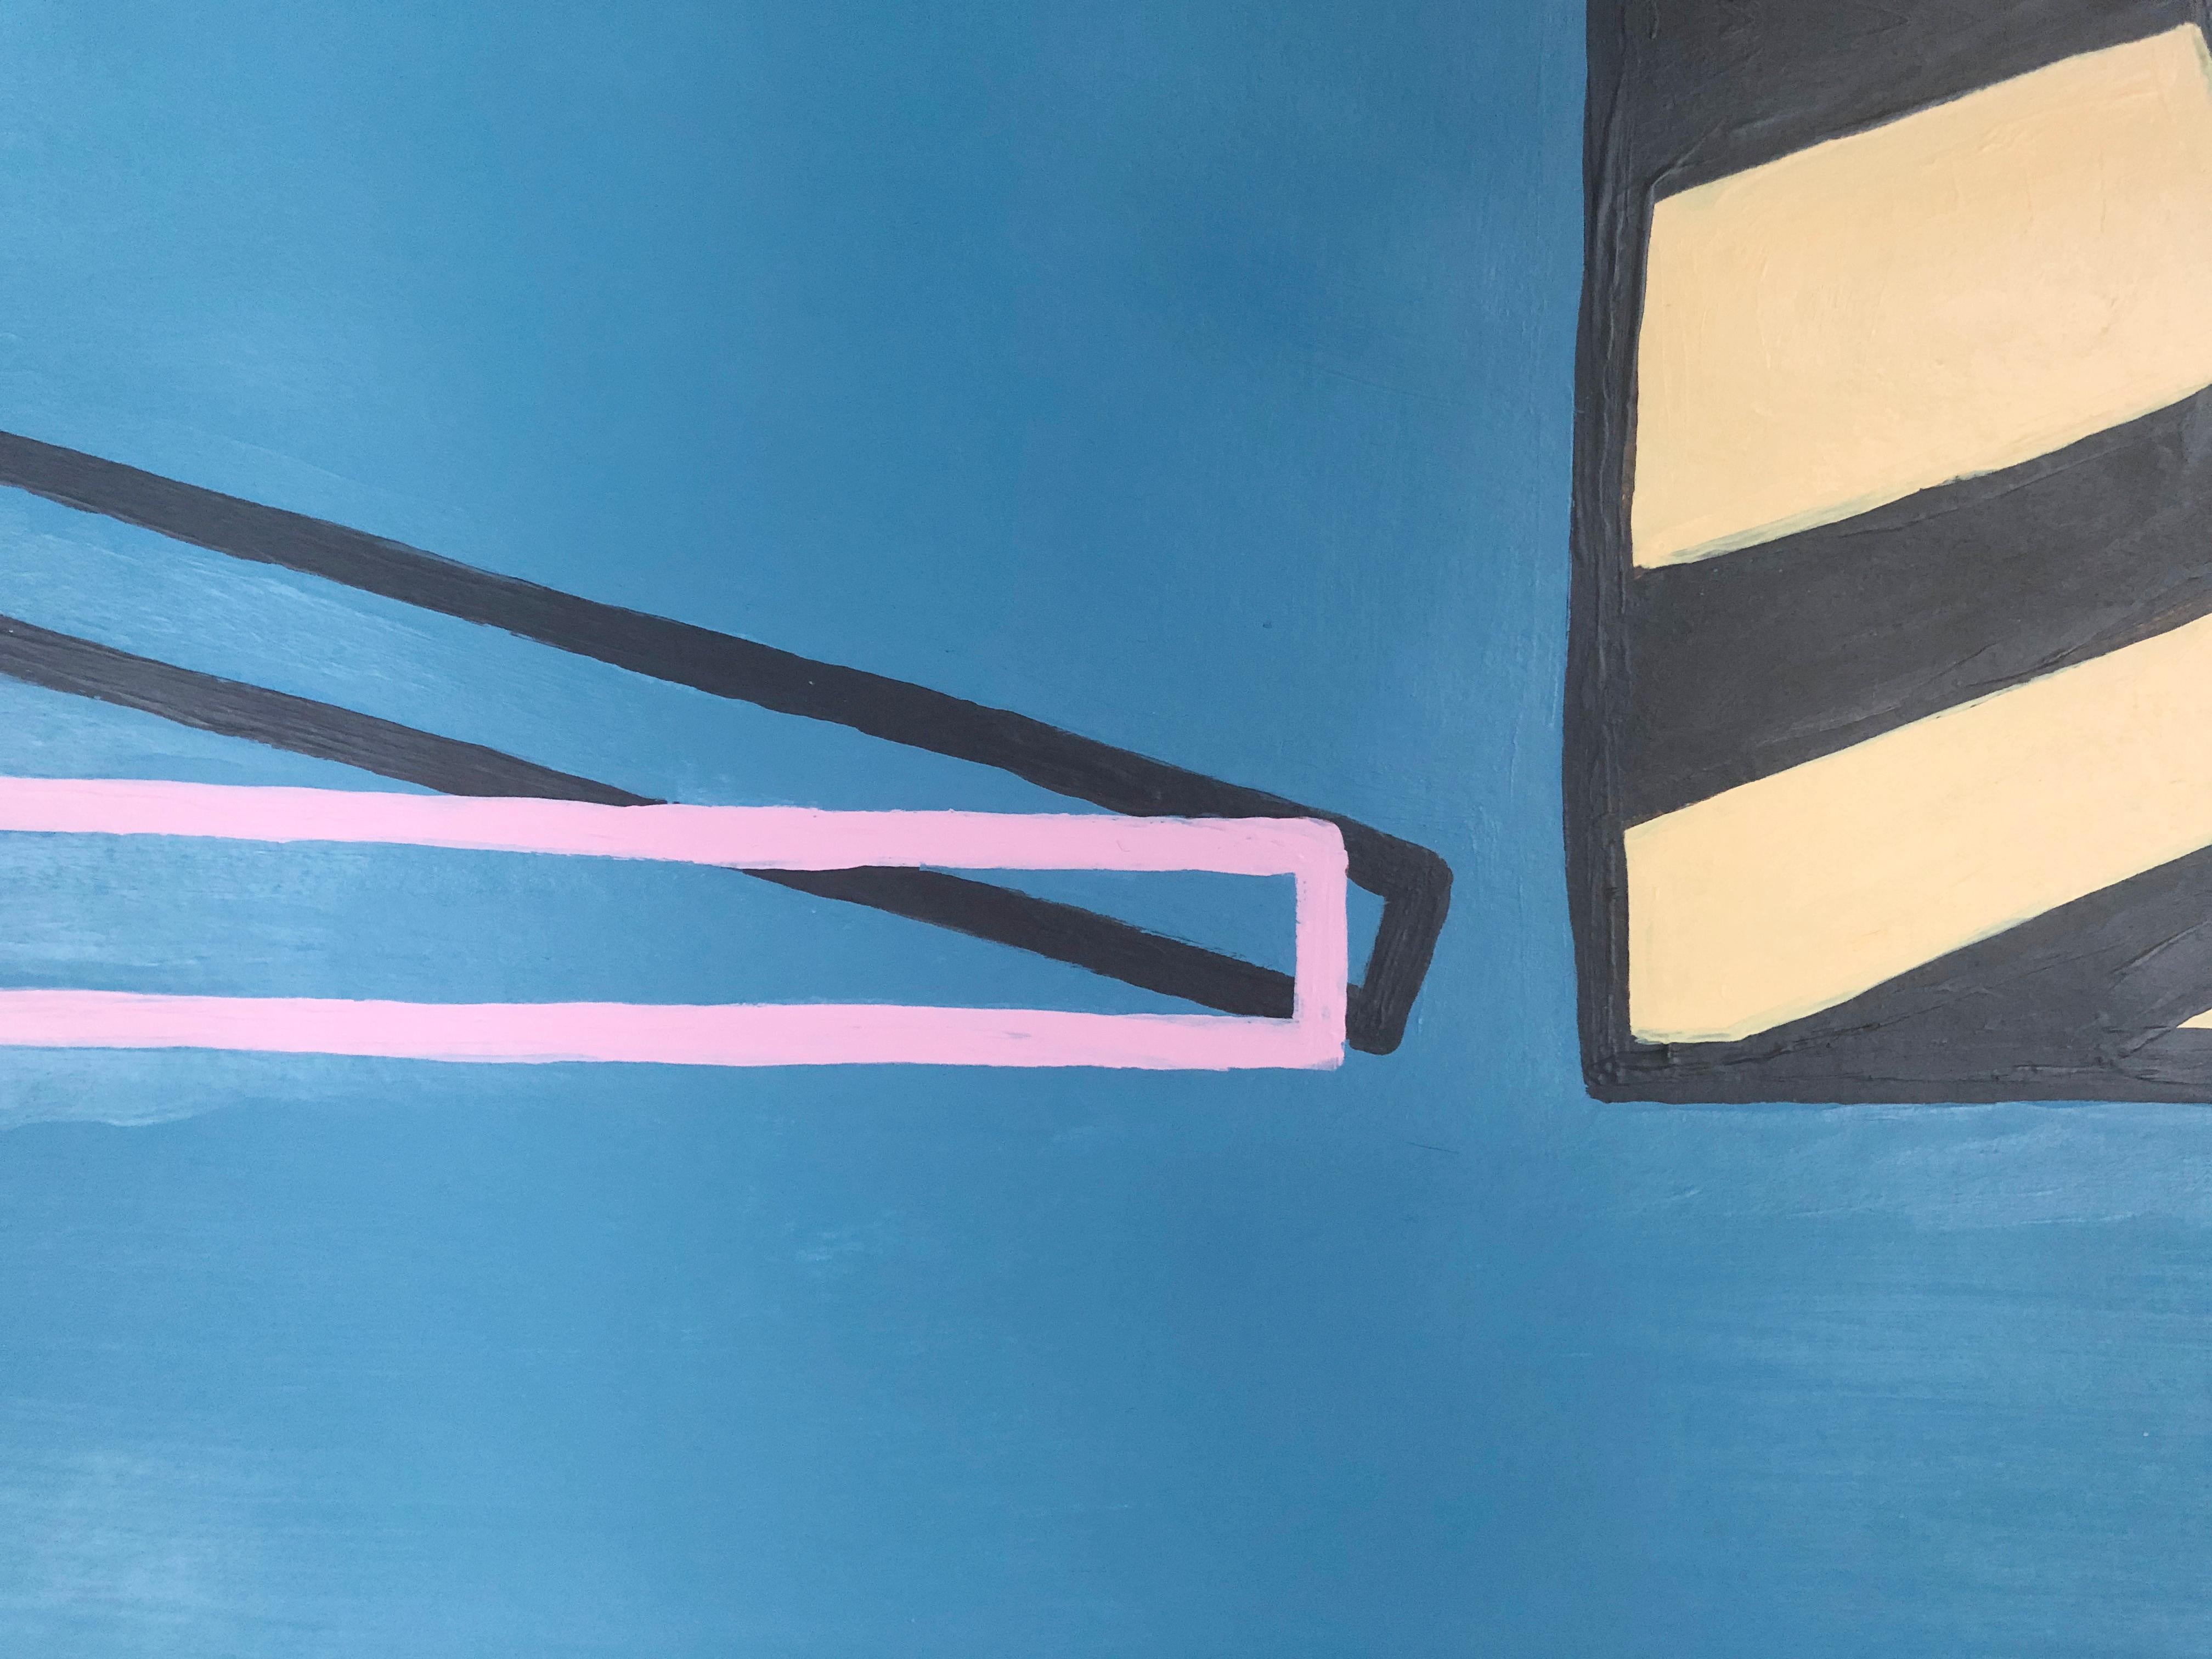 Geometric abstract painting made in 2020 by Amanda Andersen, initialed on the back. This piece is from a body of work inspired by ordinary object arrangements such as table-top still lives. The objects were simplified drastically into outlines,